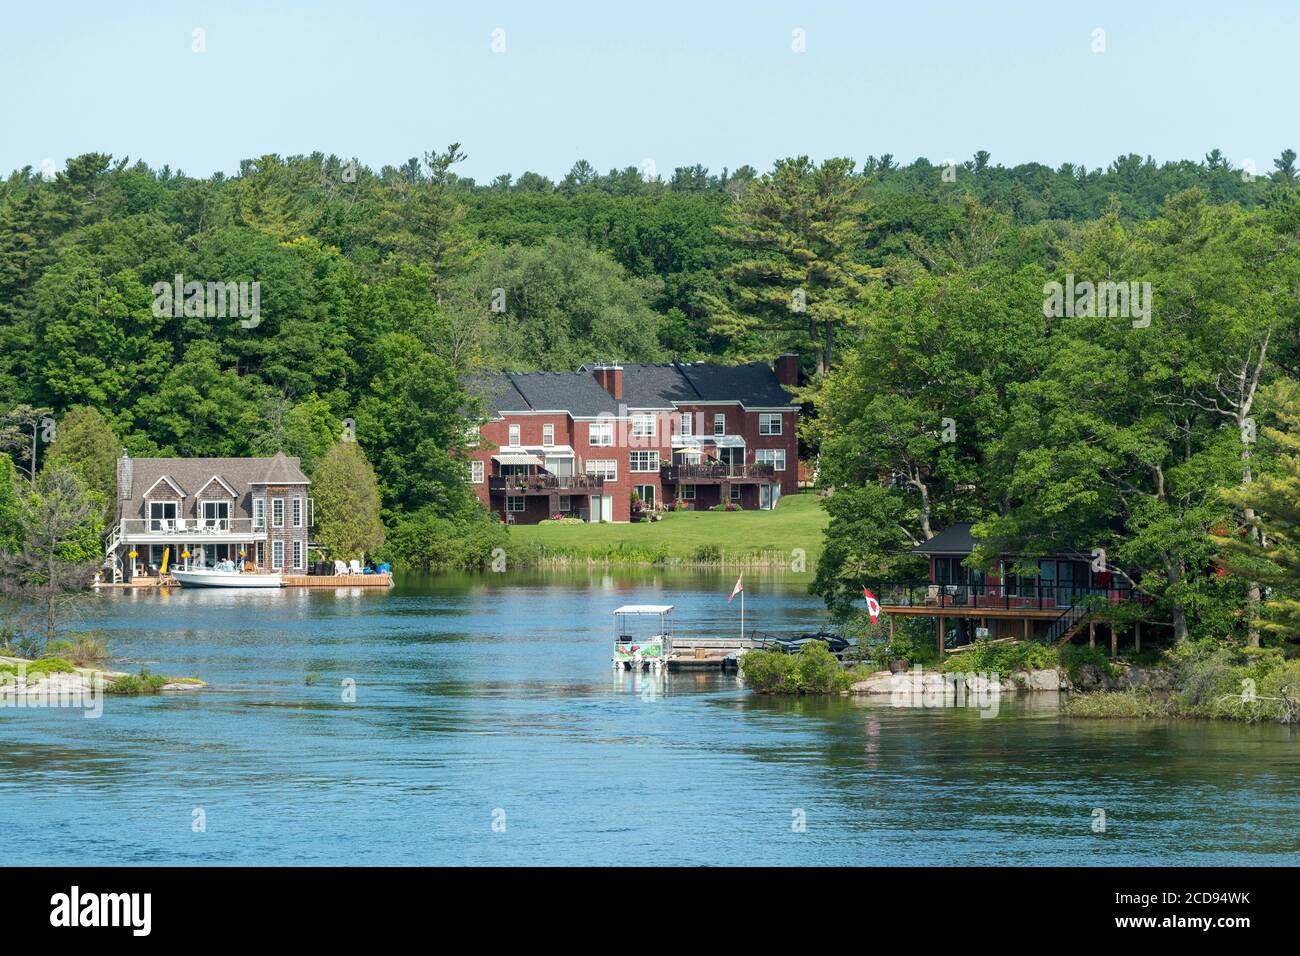 Canada, Ontario, the Thousand Islands region on the St. Lawrence River, between Canada and the USA Stock Photo